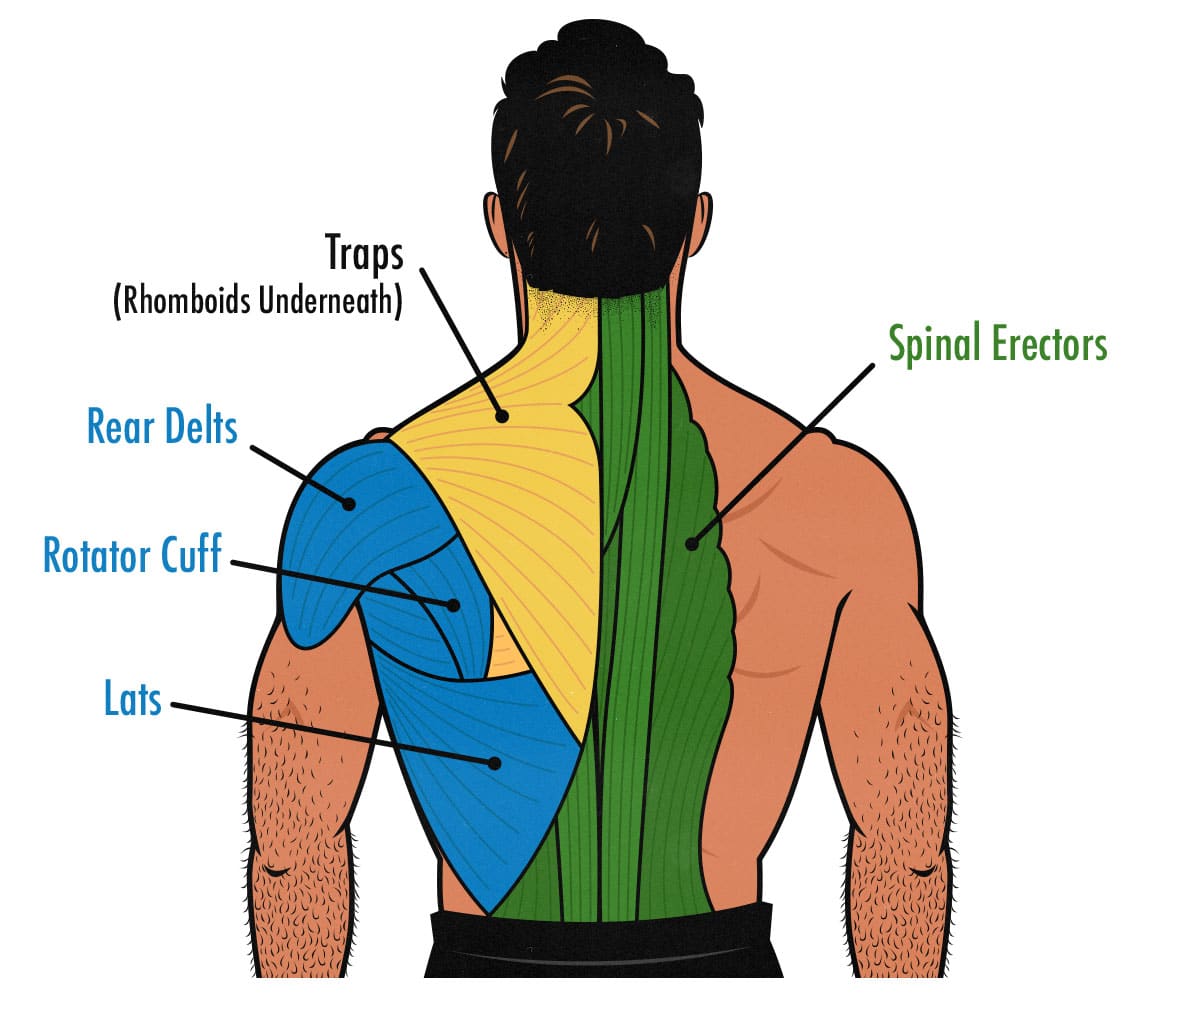 Diagram showing the anatomy of the different back muscles, including the traps, rear delts, rotator cuff, spinal erectors, and lats.